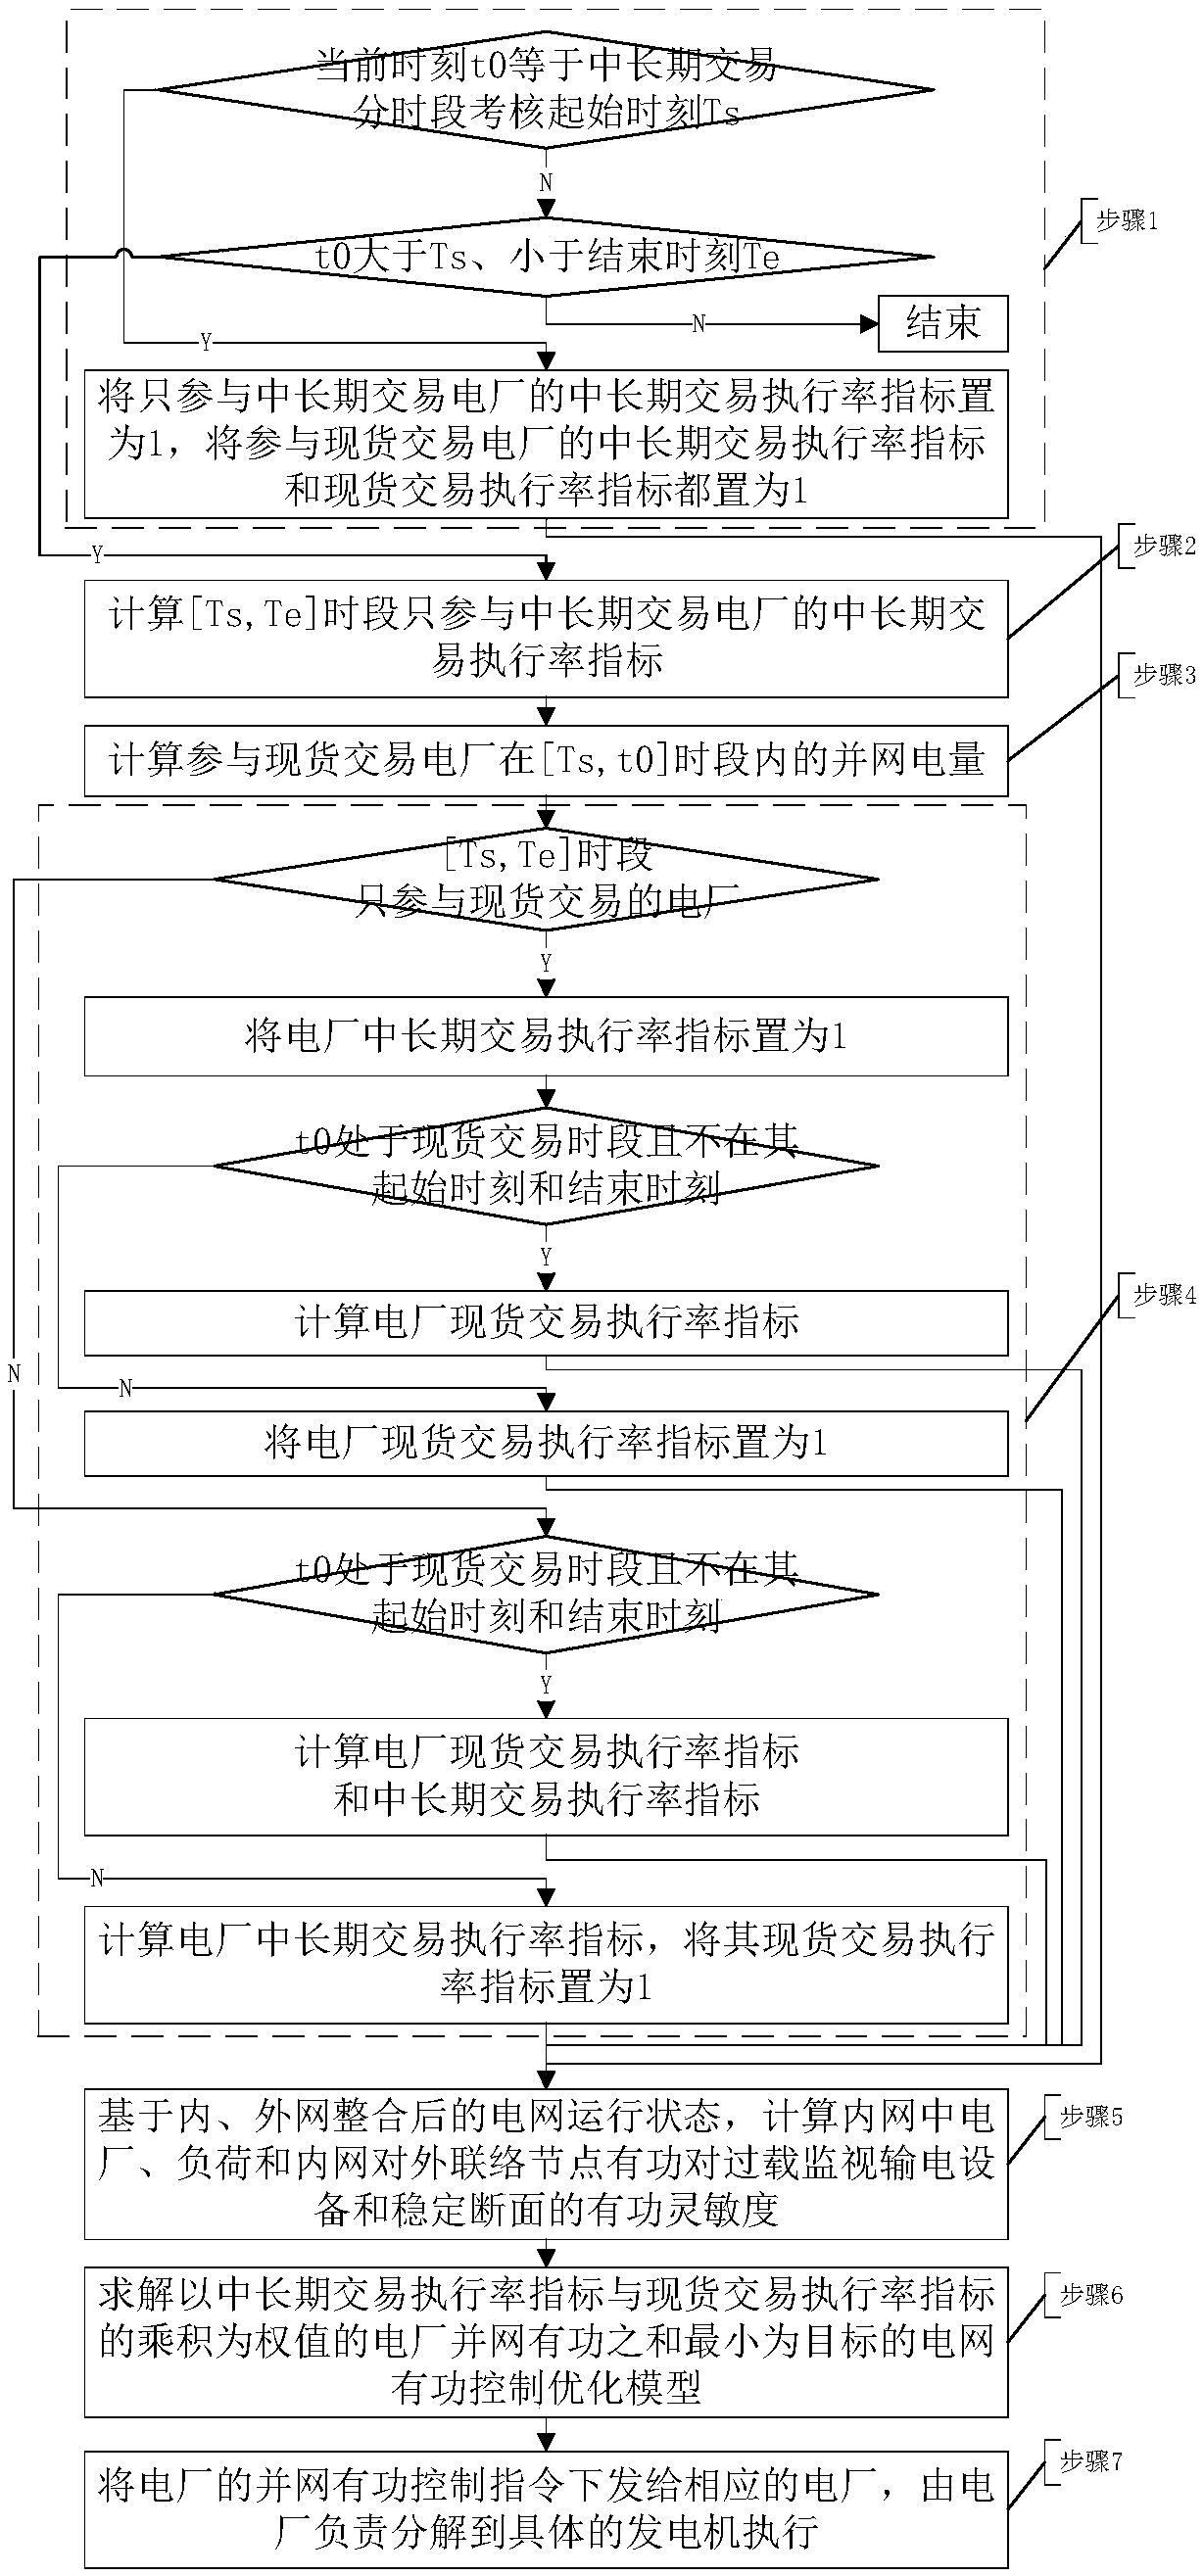 Power grid active real-time control method considering medium and long term transaction and spot transaction constraints